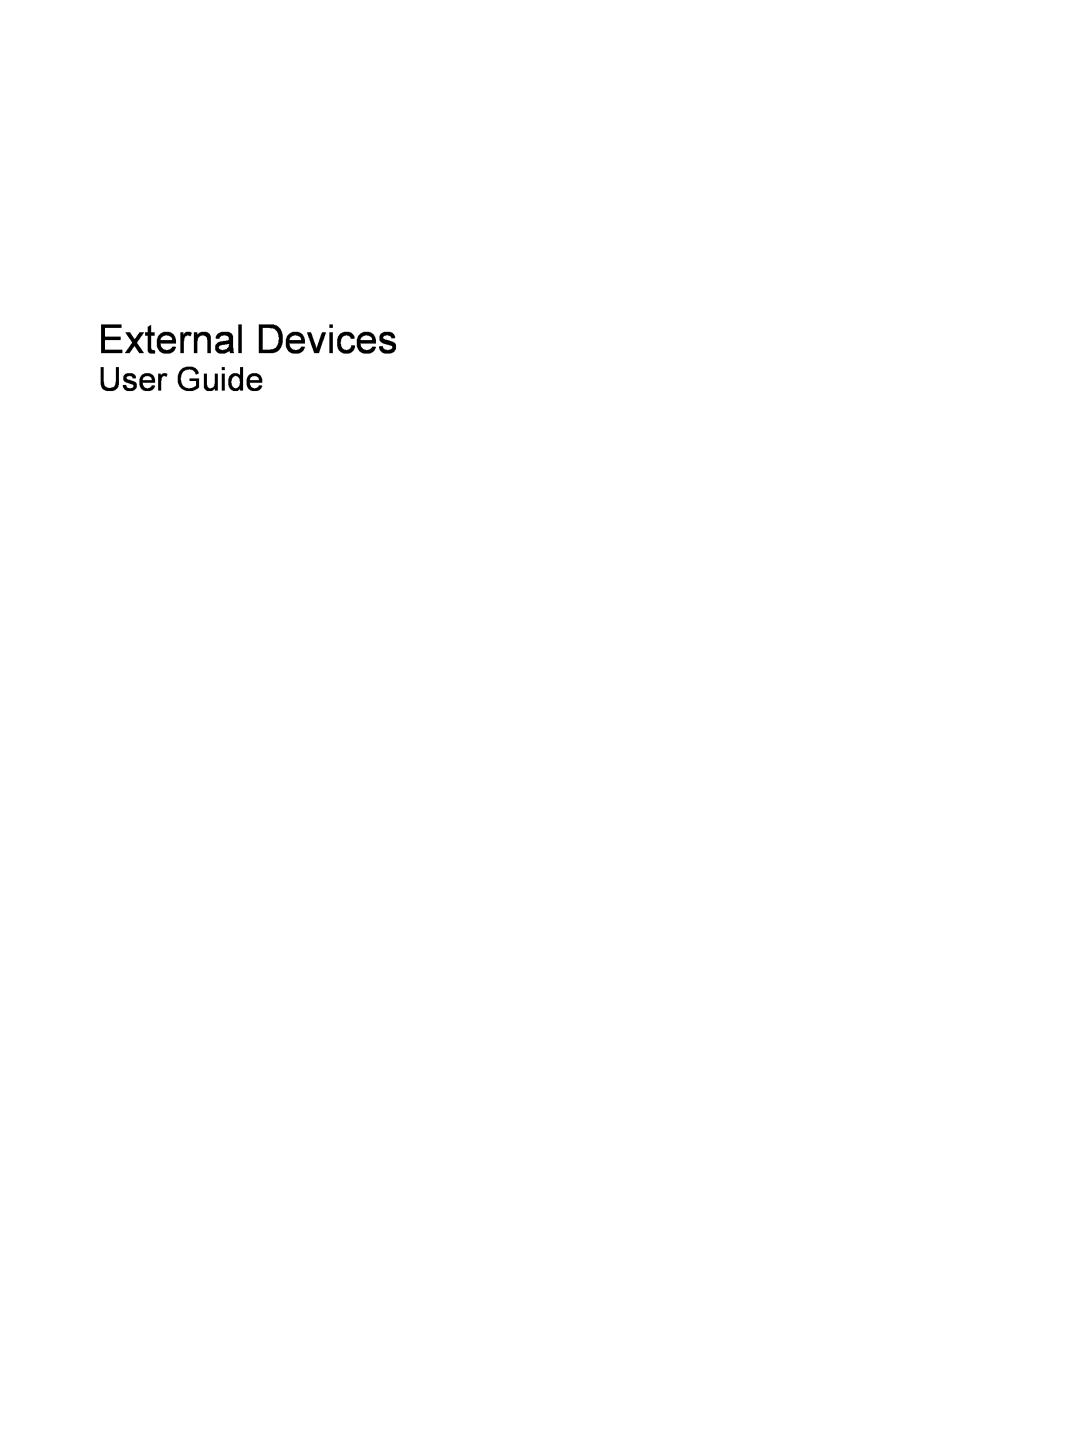 HP CQ61-313AX, CQ61-312TX, CQ61-311TU, CQ61-312SL, CQ61-310US, CQ61-309TU, CQ61-307AU manual External Devices, User Guide 